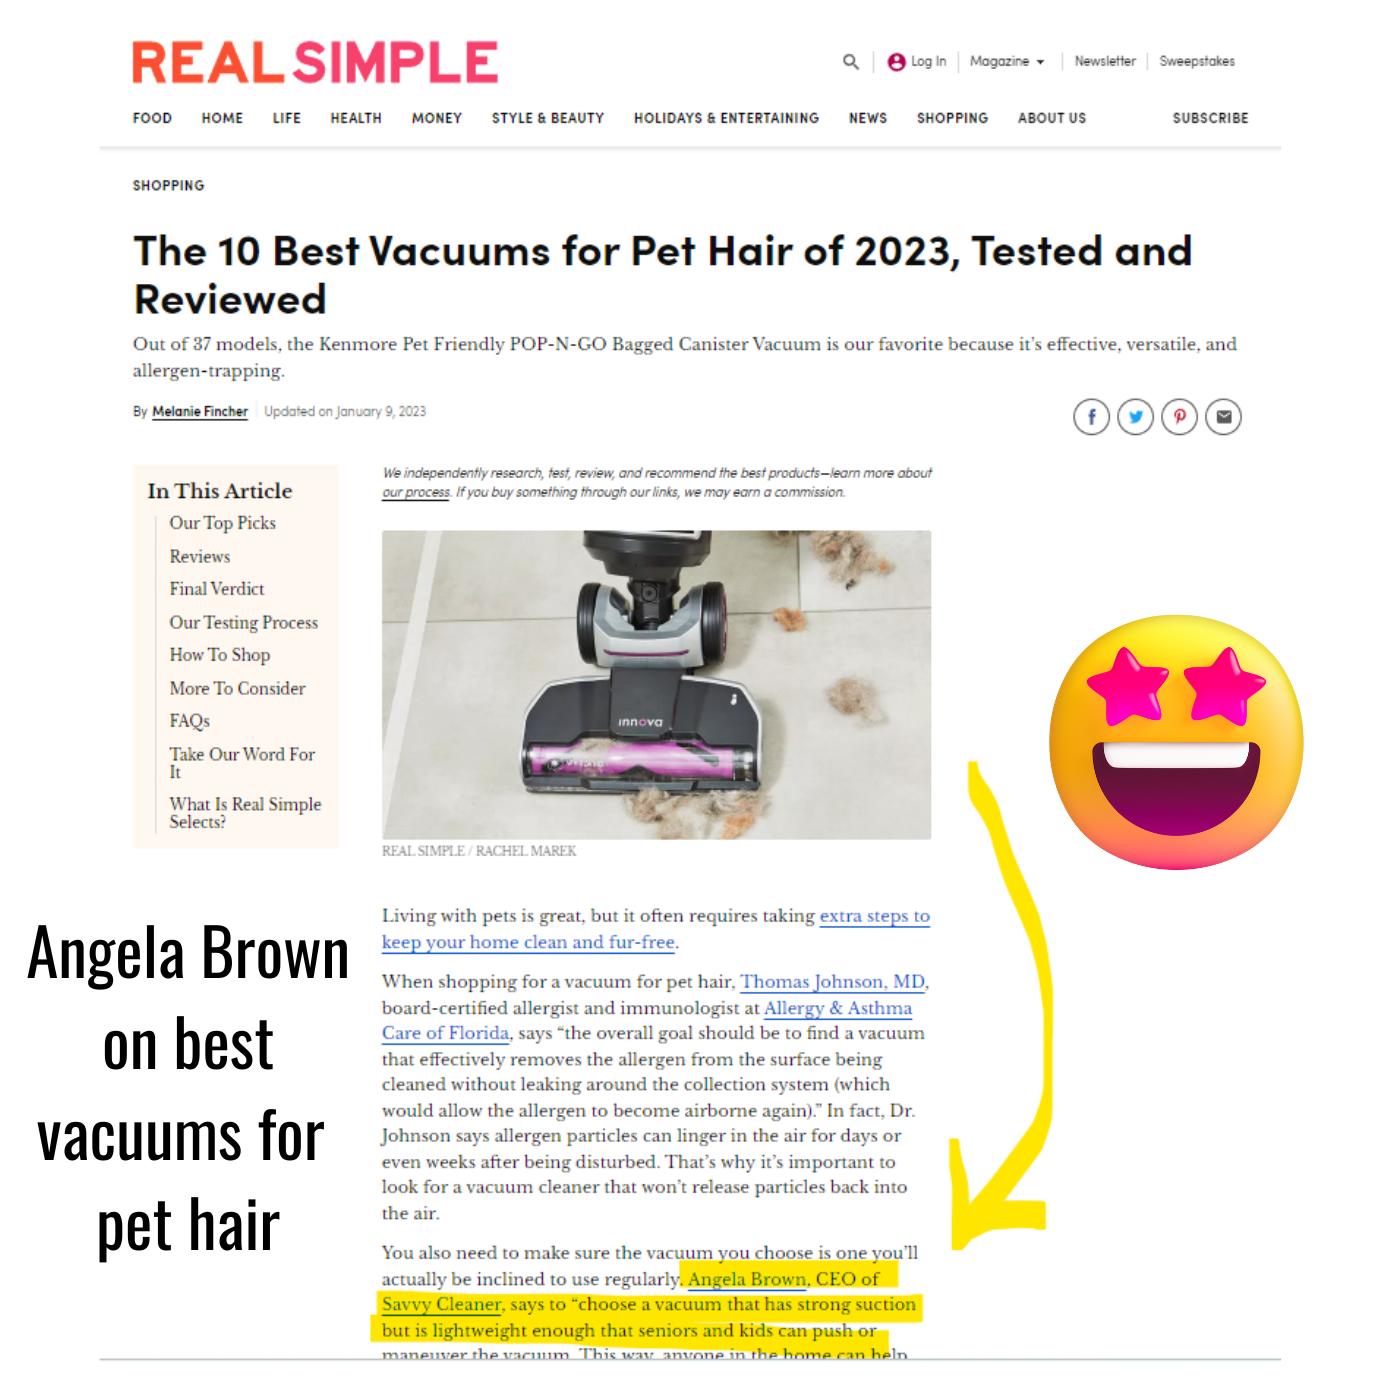 Angela-Brown-Melanie-Fincher-Collaborate-on-Best-Vacuums-for-2023-for-Pet-Hair.jpg